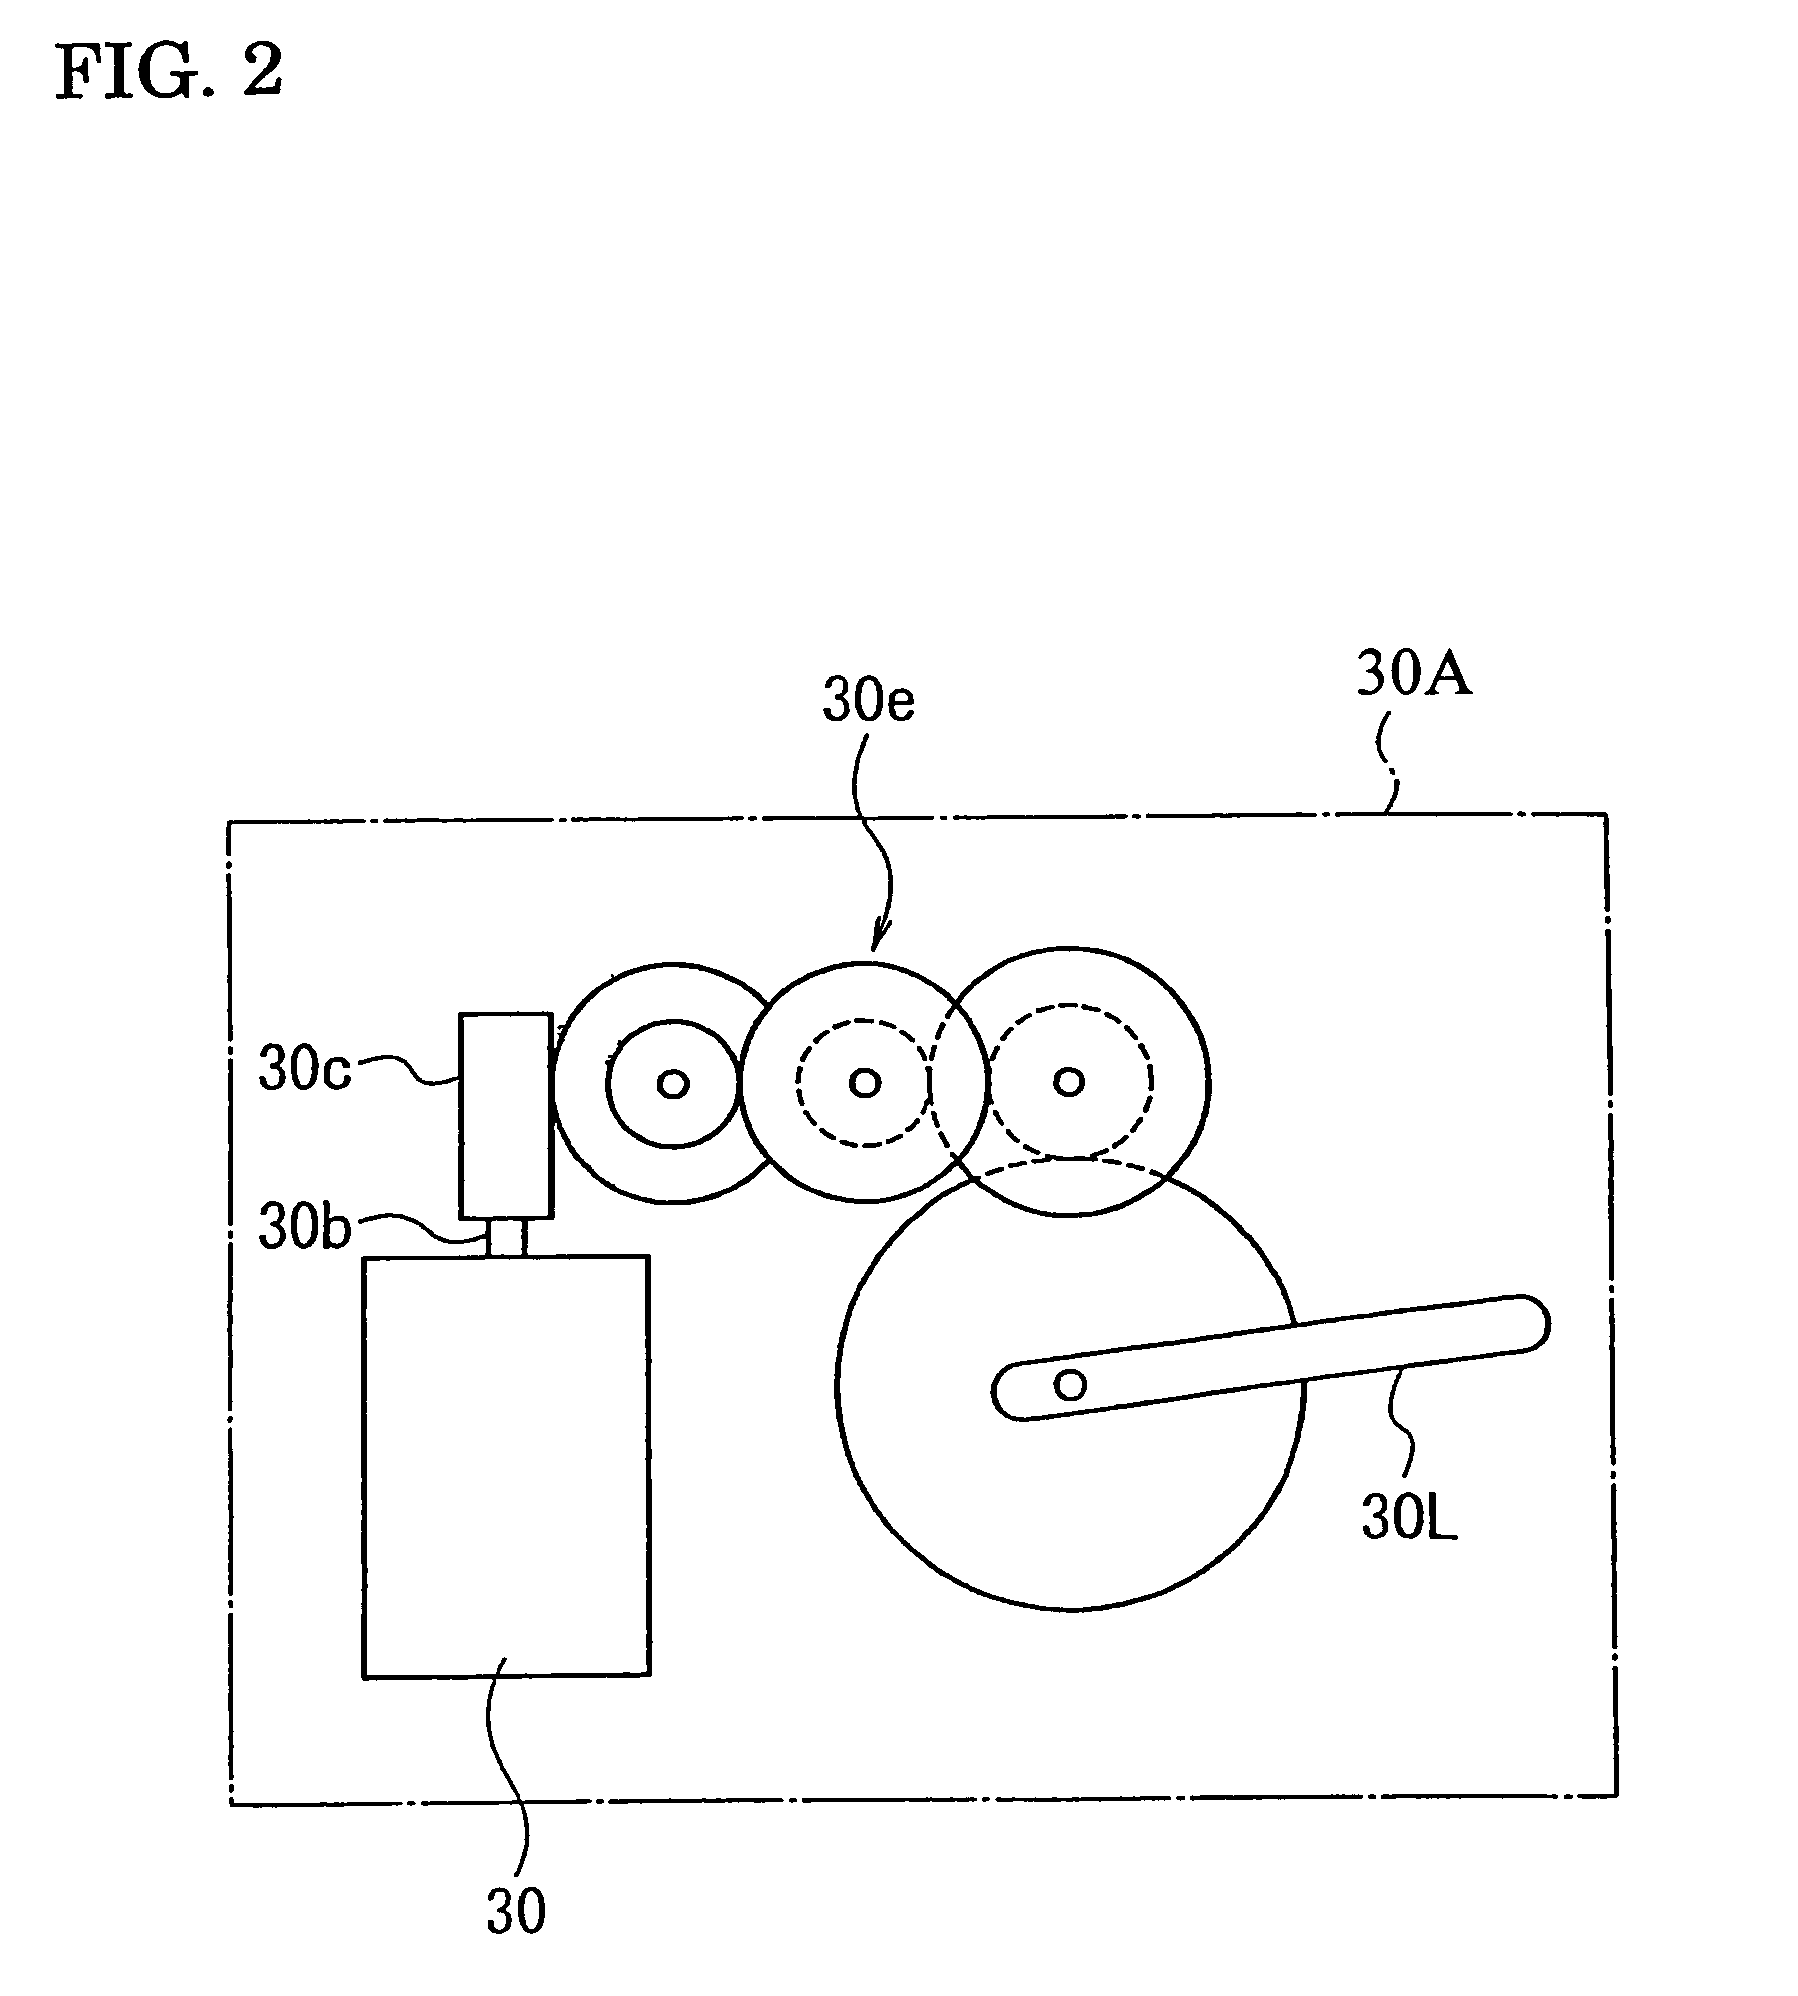 Driving control device for actuator